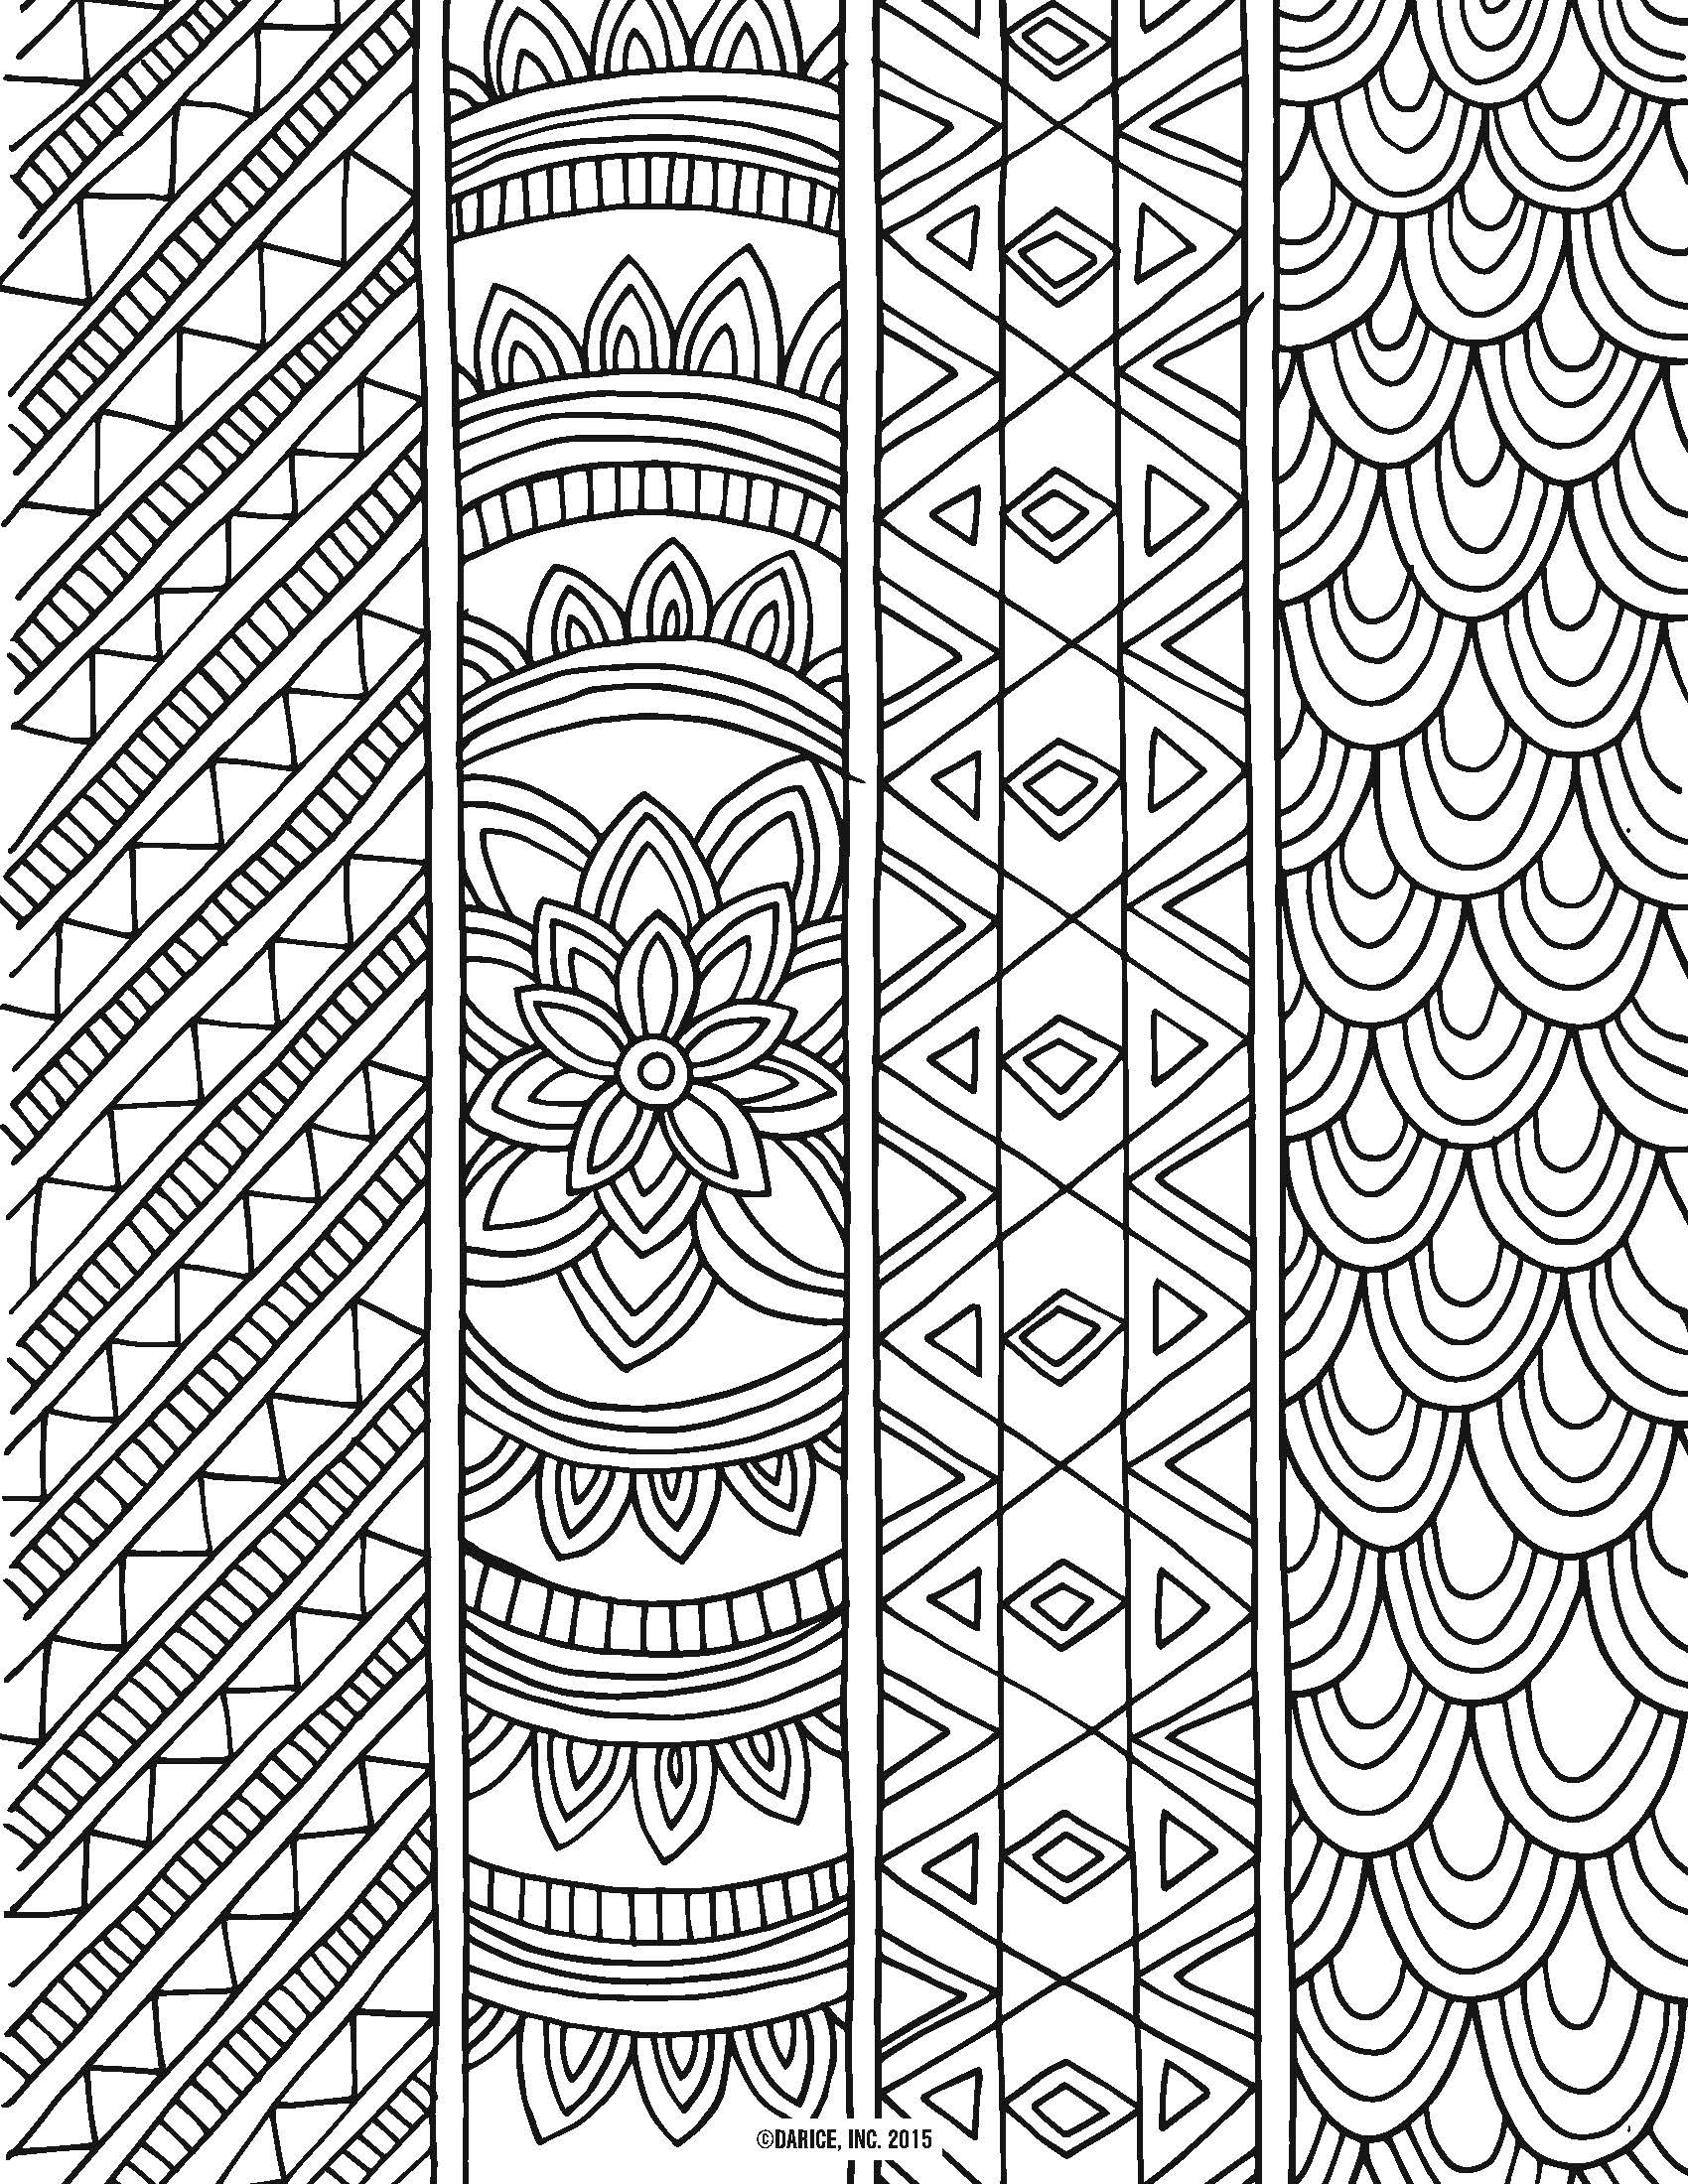 9 Free Printable Adult Coloring Pages | Pat Catan&amp;#039;s Blog - Free Printable Coloring Pages For Adults